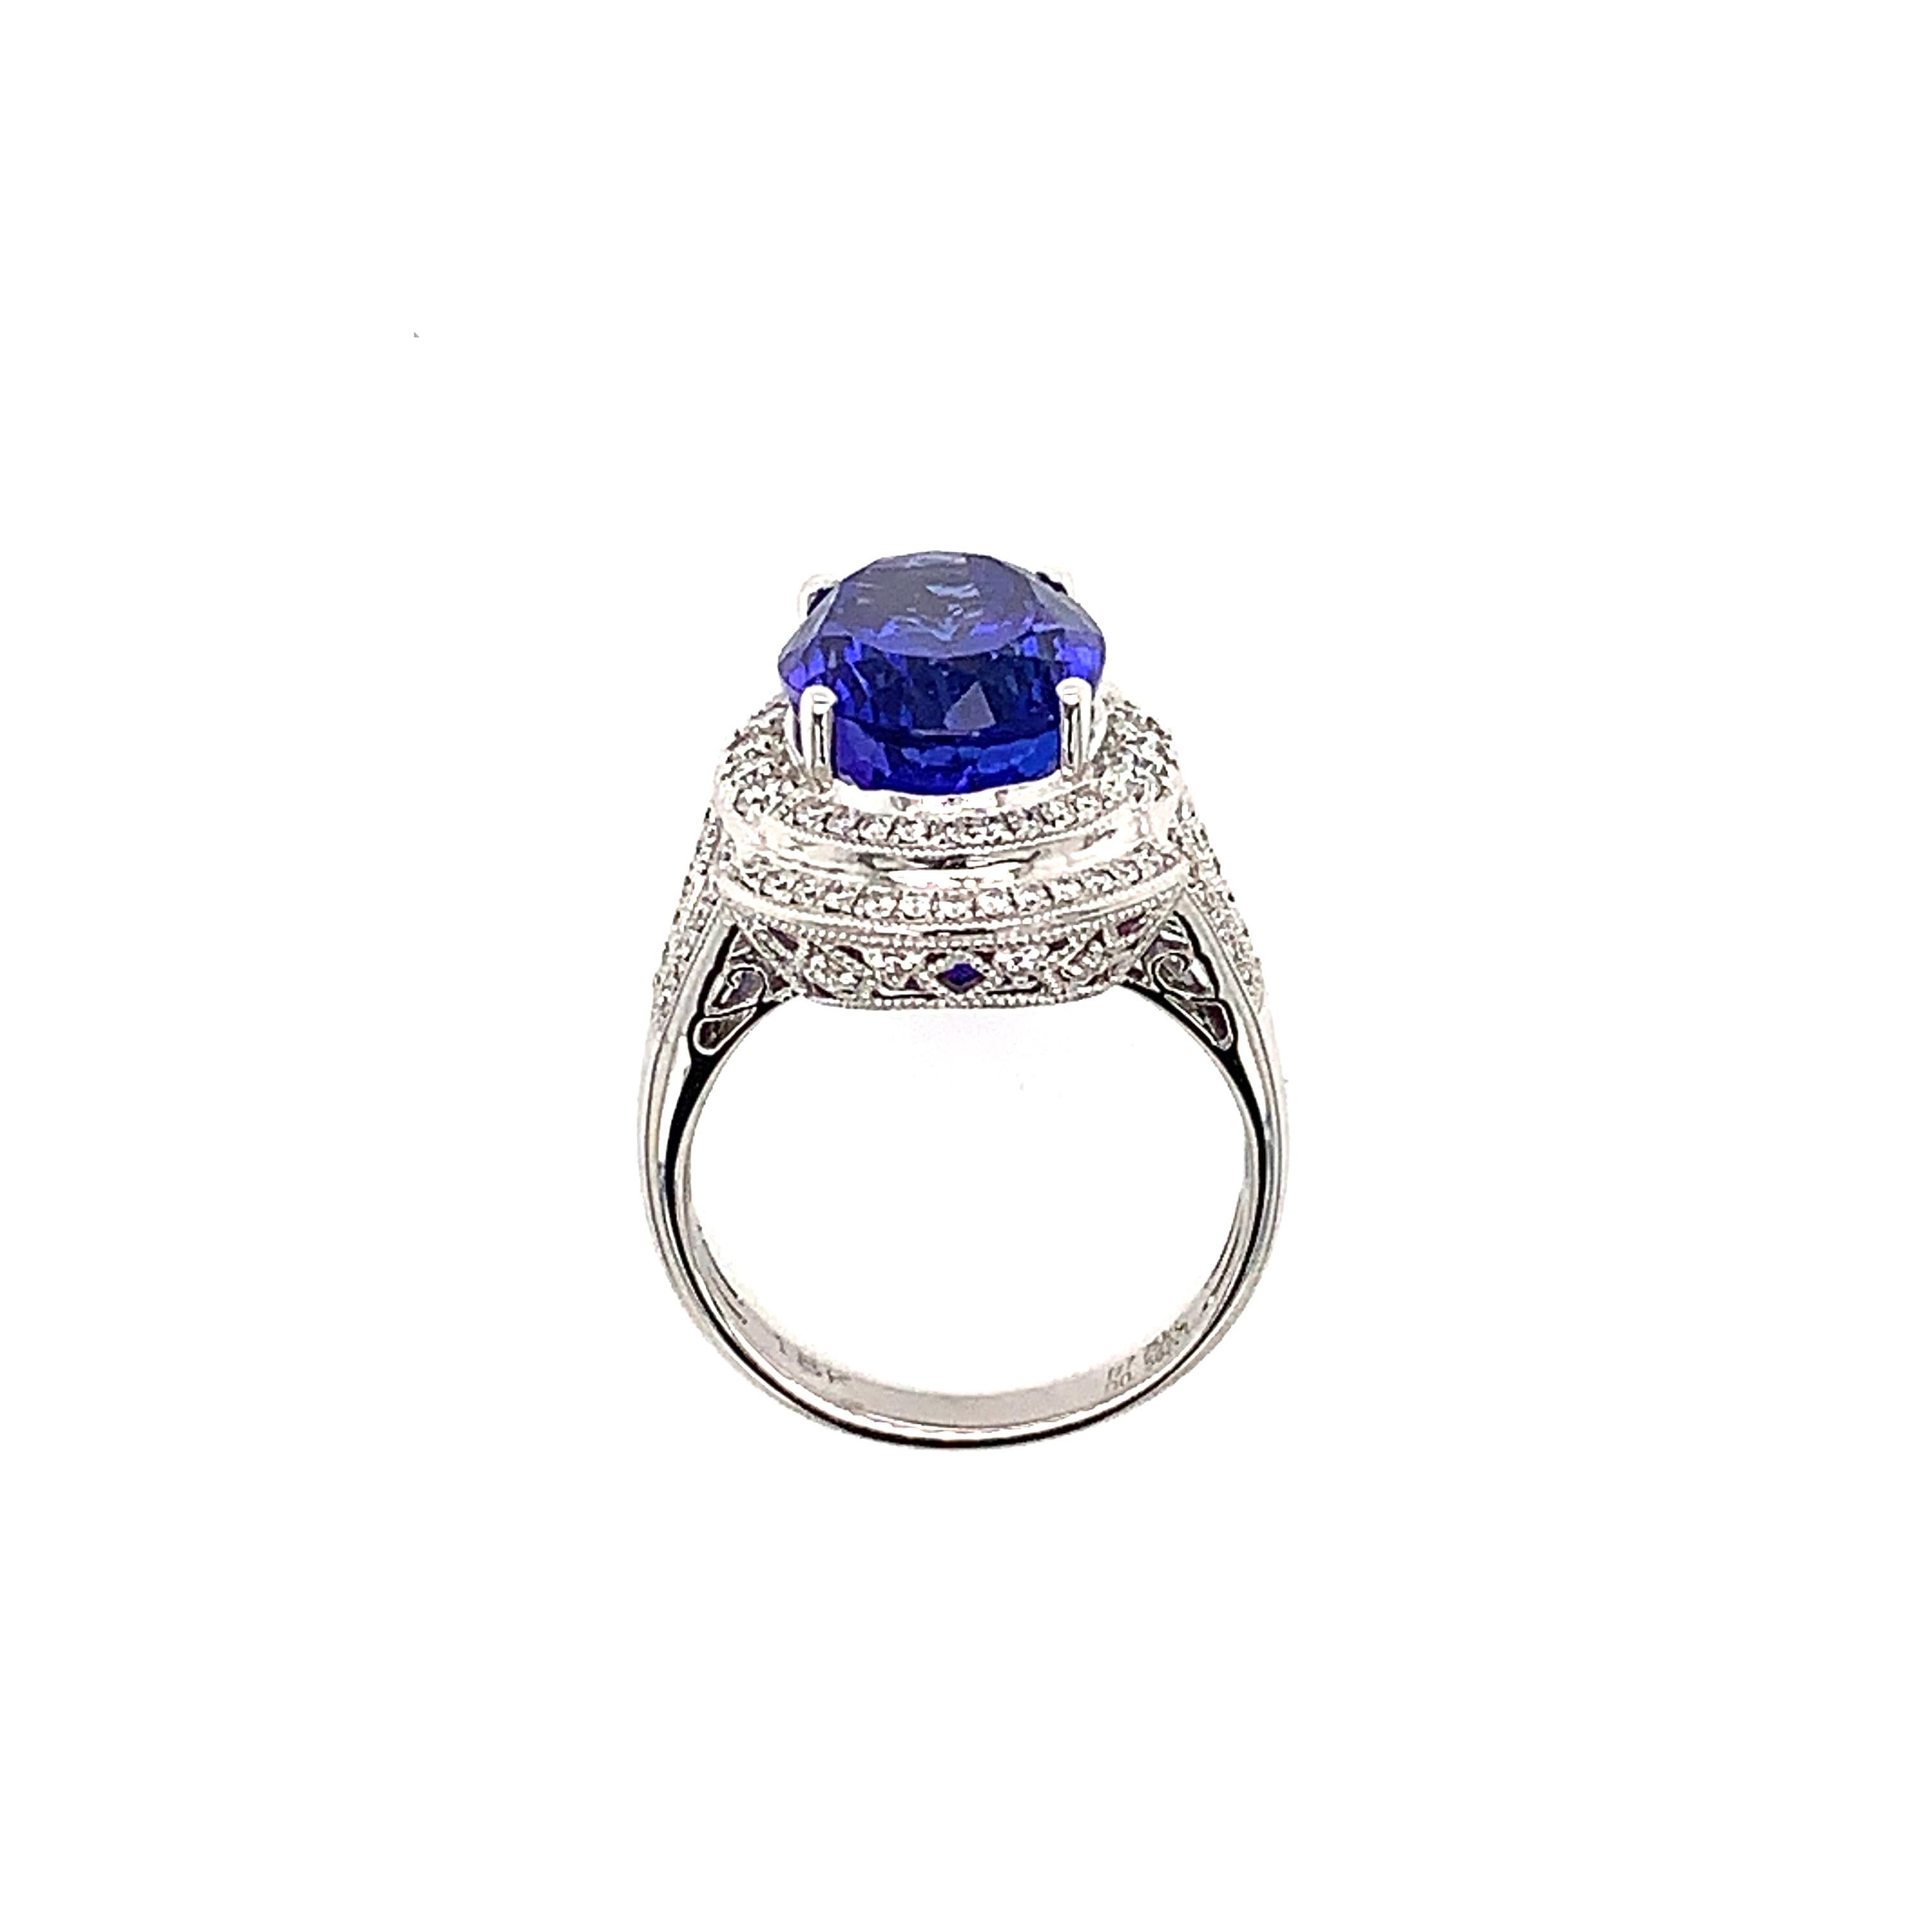 Classic tanzanite ring in 18K white gold with diamonds. 

Tanzanite: 7.753 carat oval shape.
Diamonds: 0.560 carat, G colour, VS clarity. 
Gold: 7.097g, 18K white gold. 